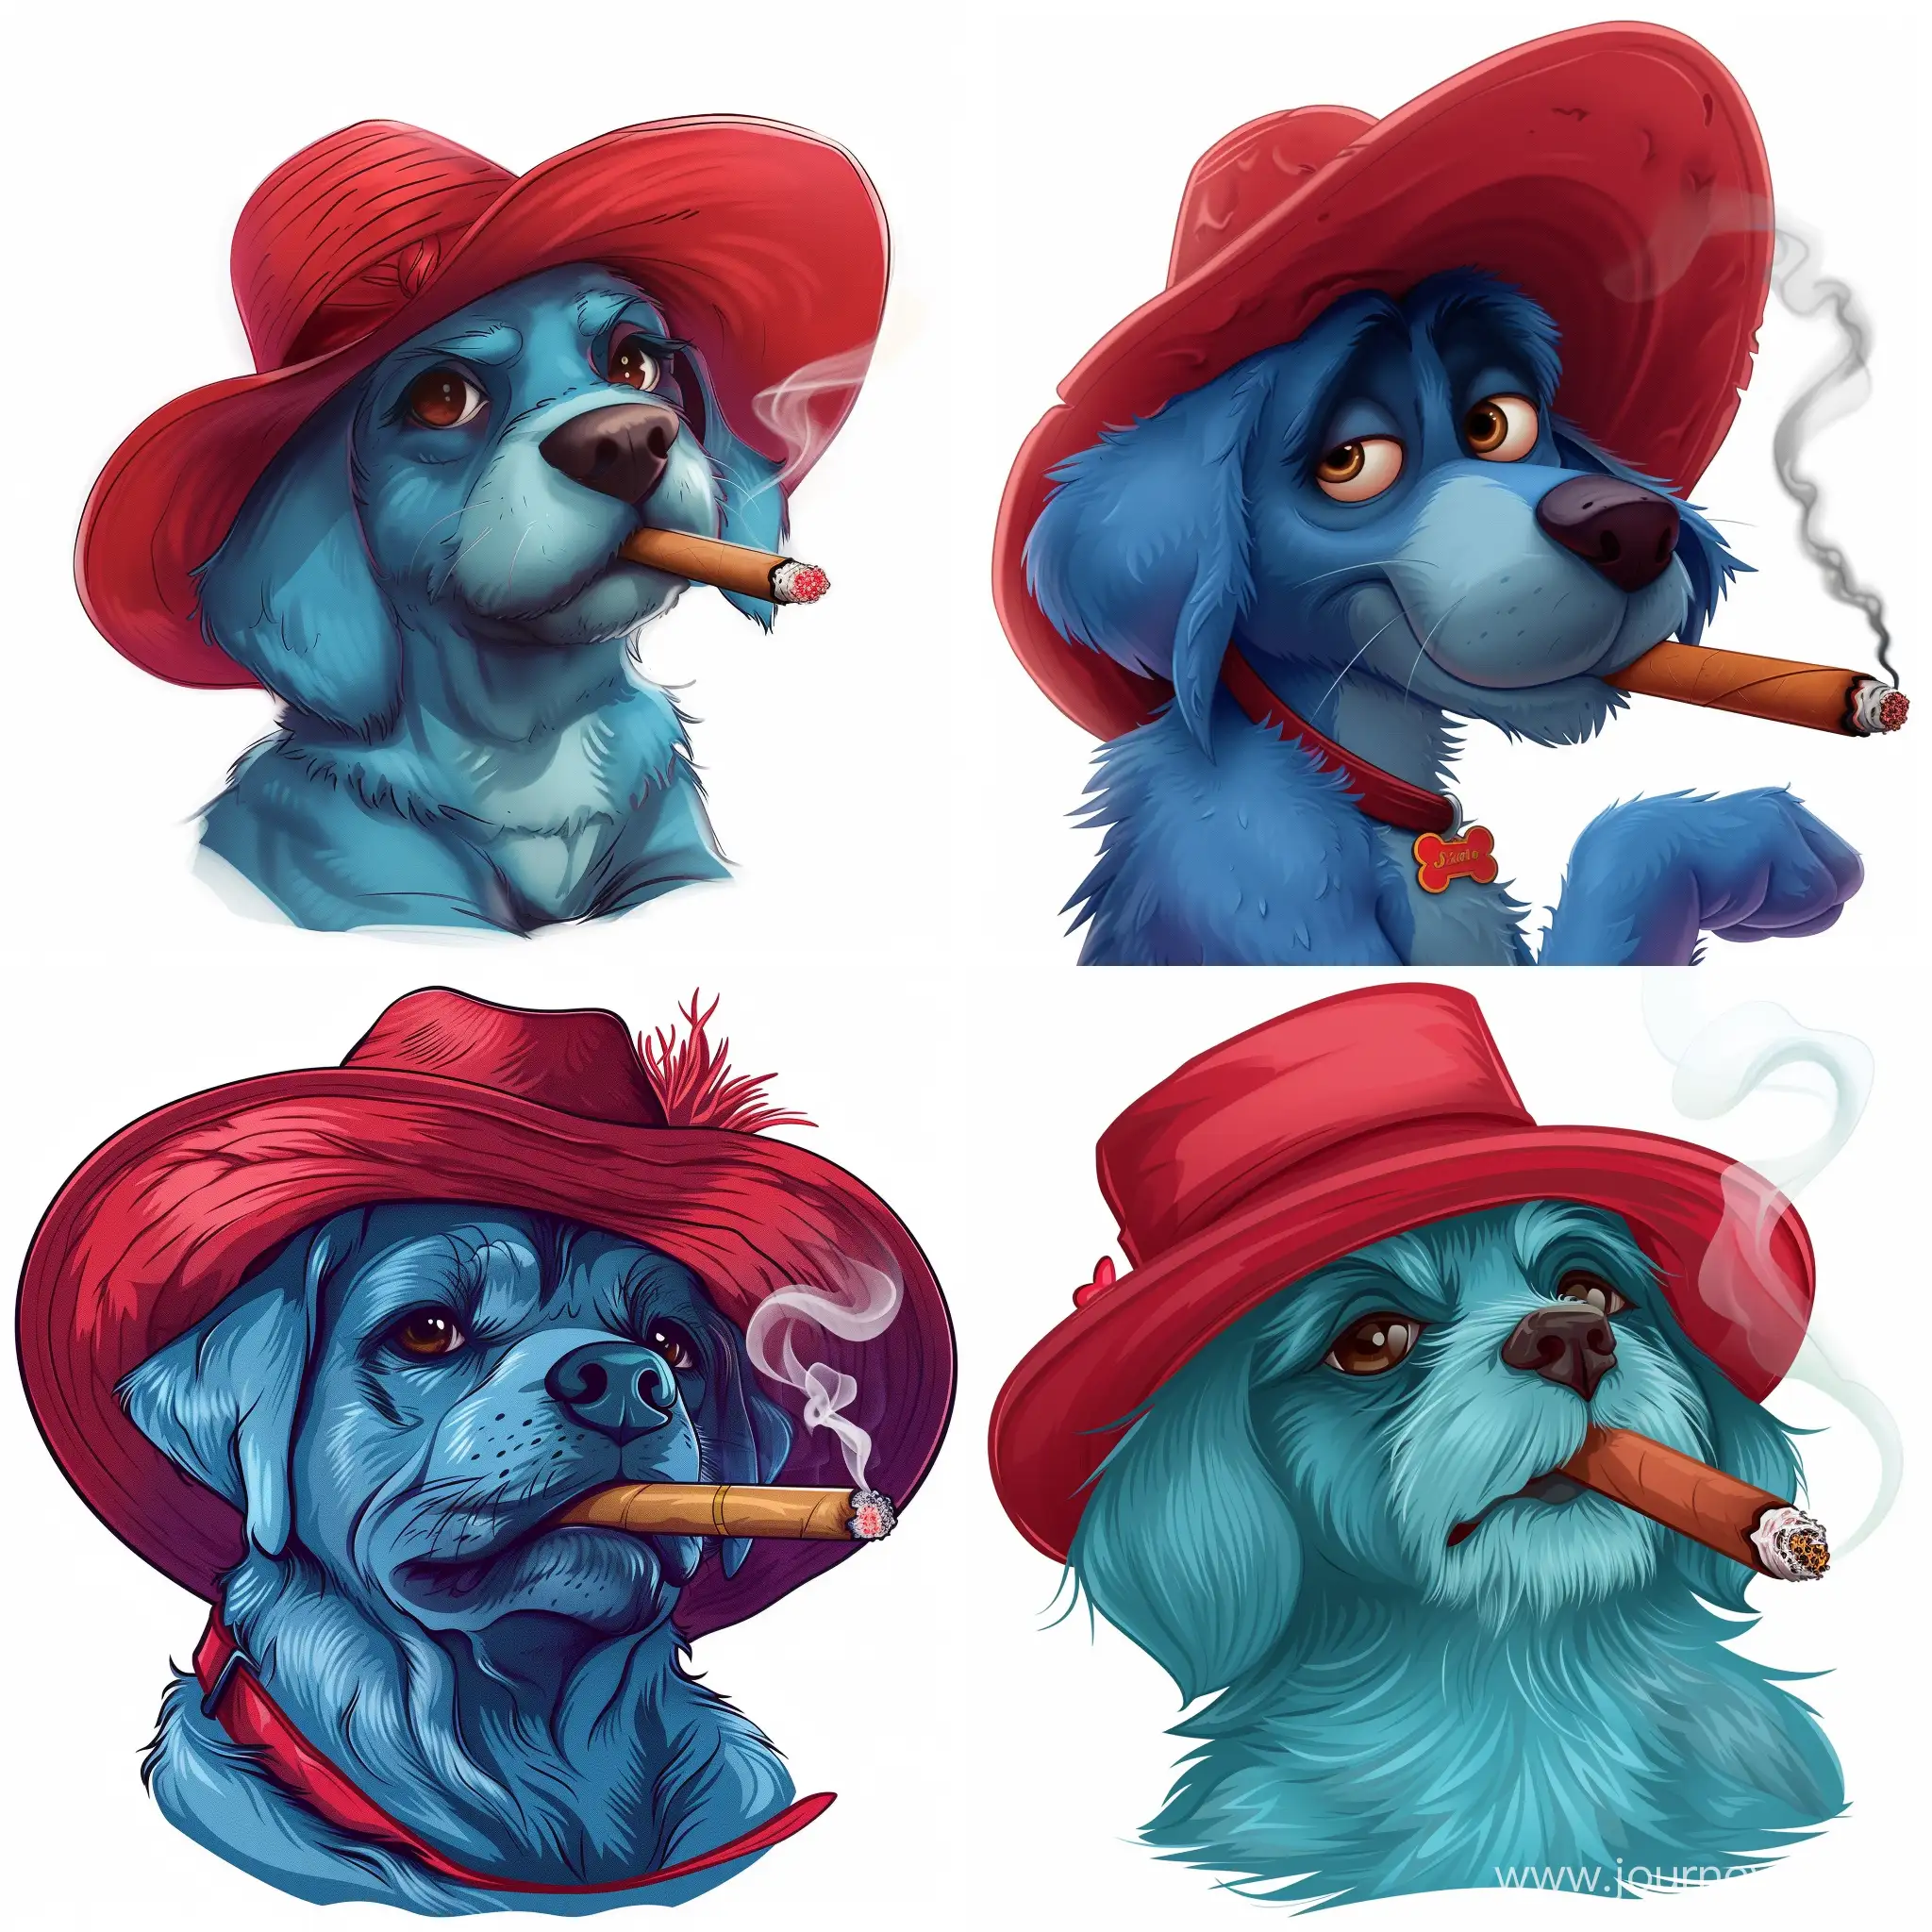 Animated-Blue-Dog-Smoking-a-Cigar-in-Red-Hat-on-White-Background